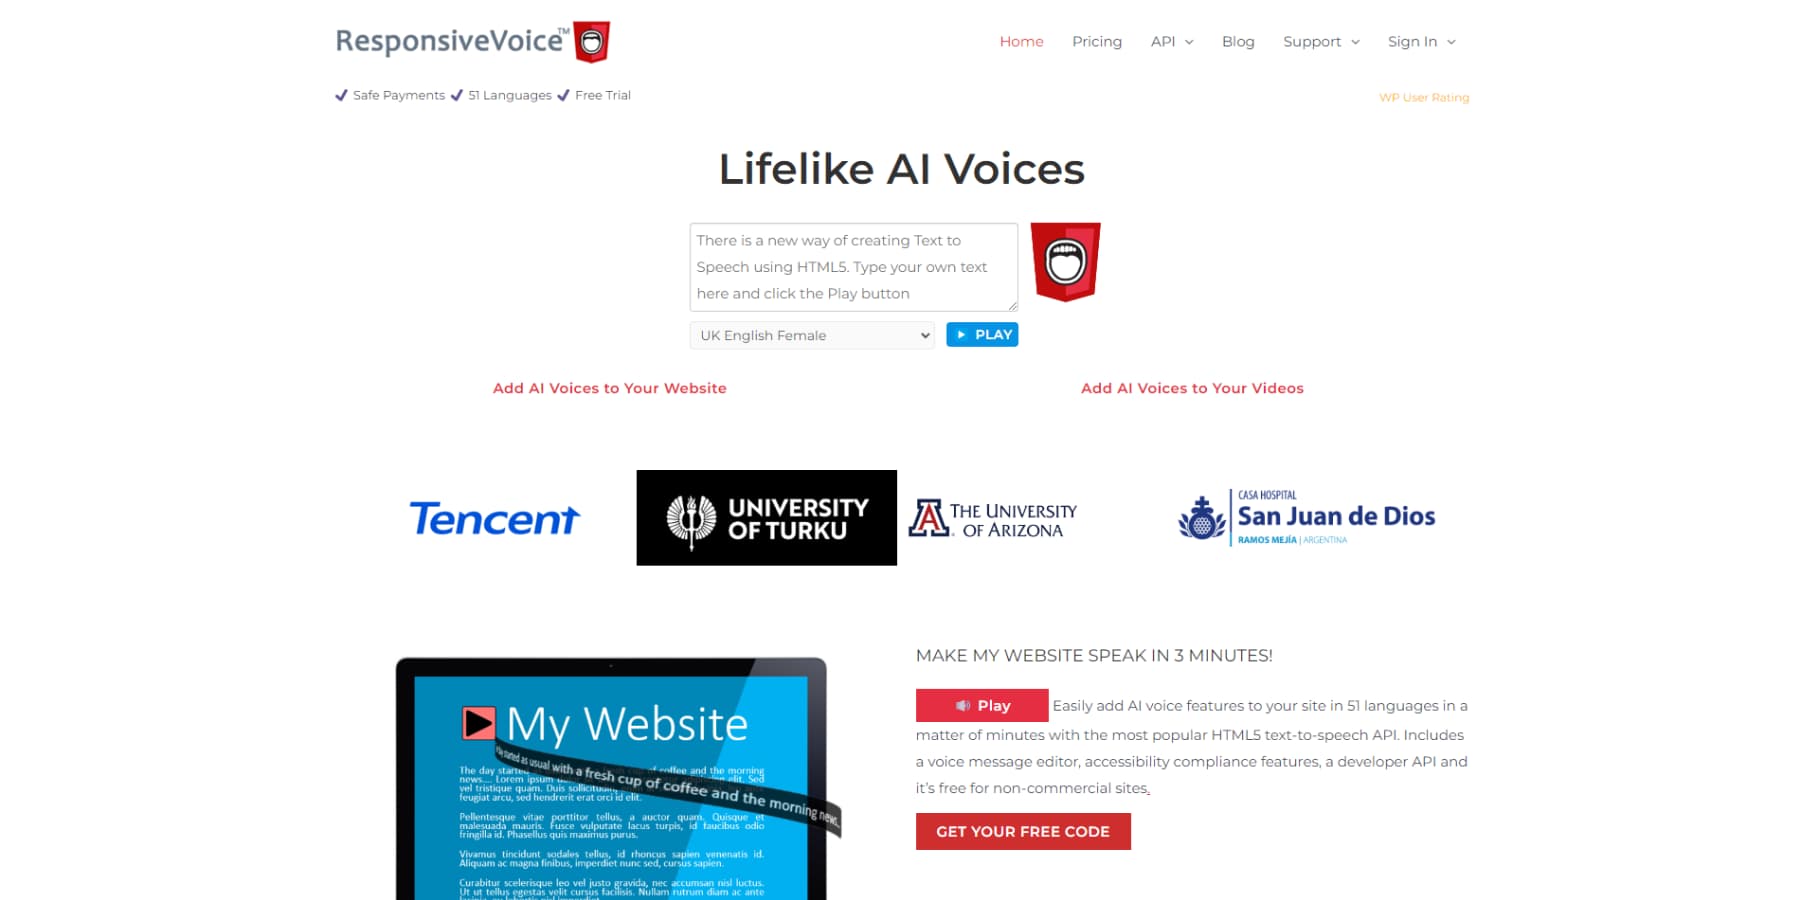 A screenshot of ResponsiveVoice's home page